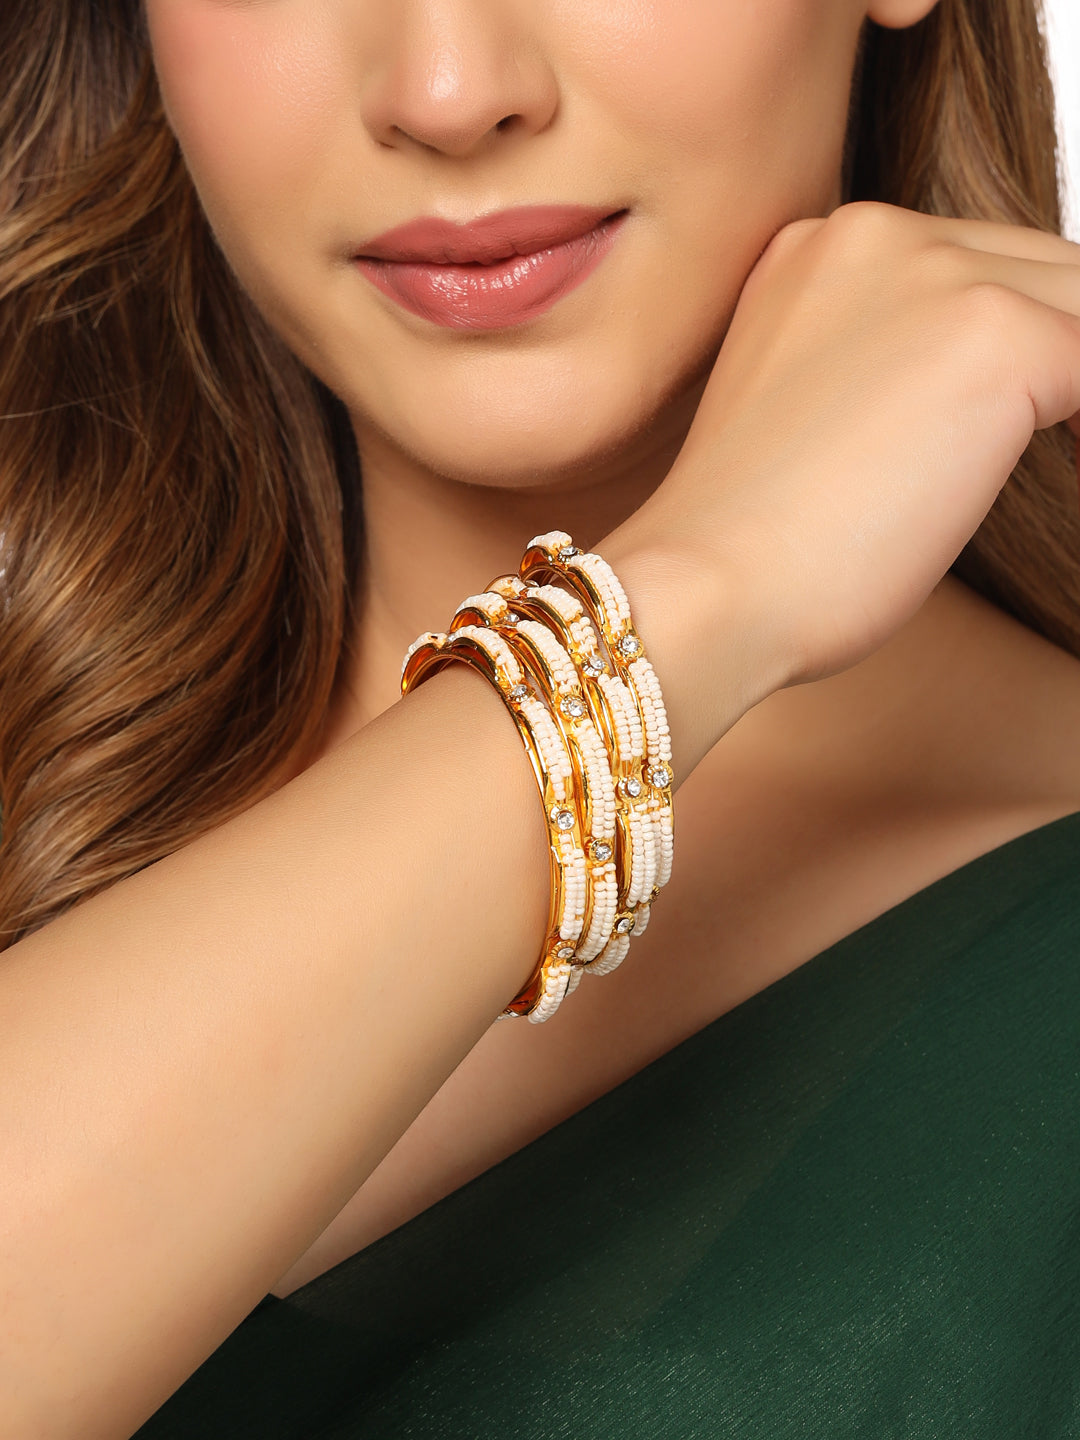 Women's Set Of 4 Gold-Plated Traditional Pearls Beaded Bangles - NVR